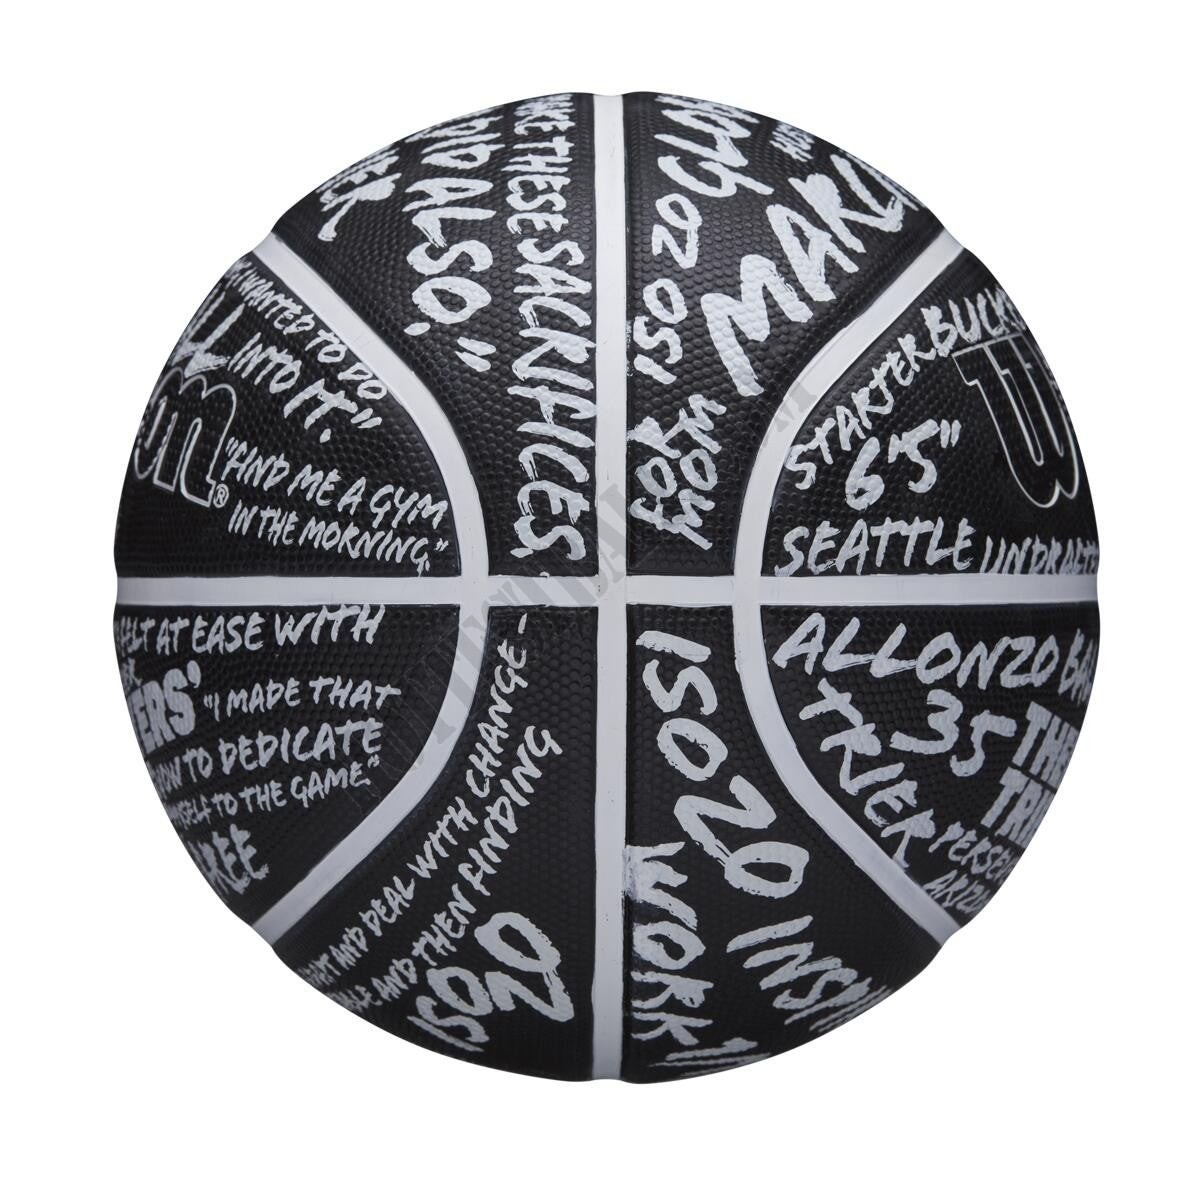 ISO Zo x The Players' Tribune Limited Edition Basketball - Wilson Discount Store - -6